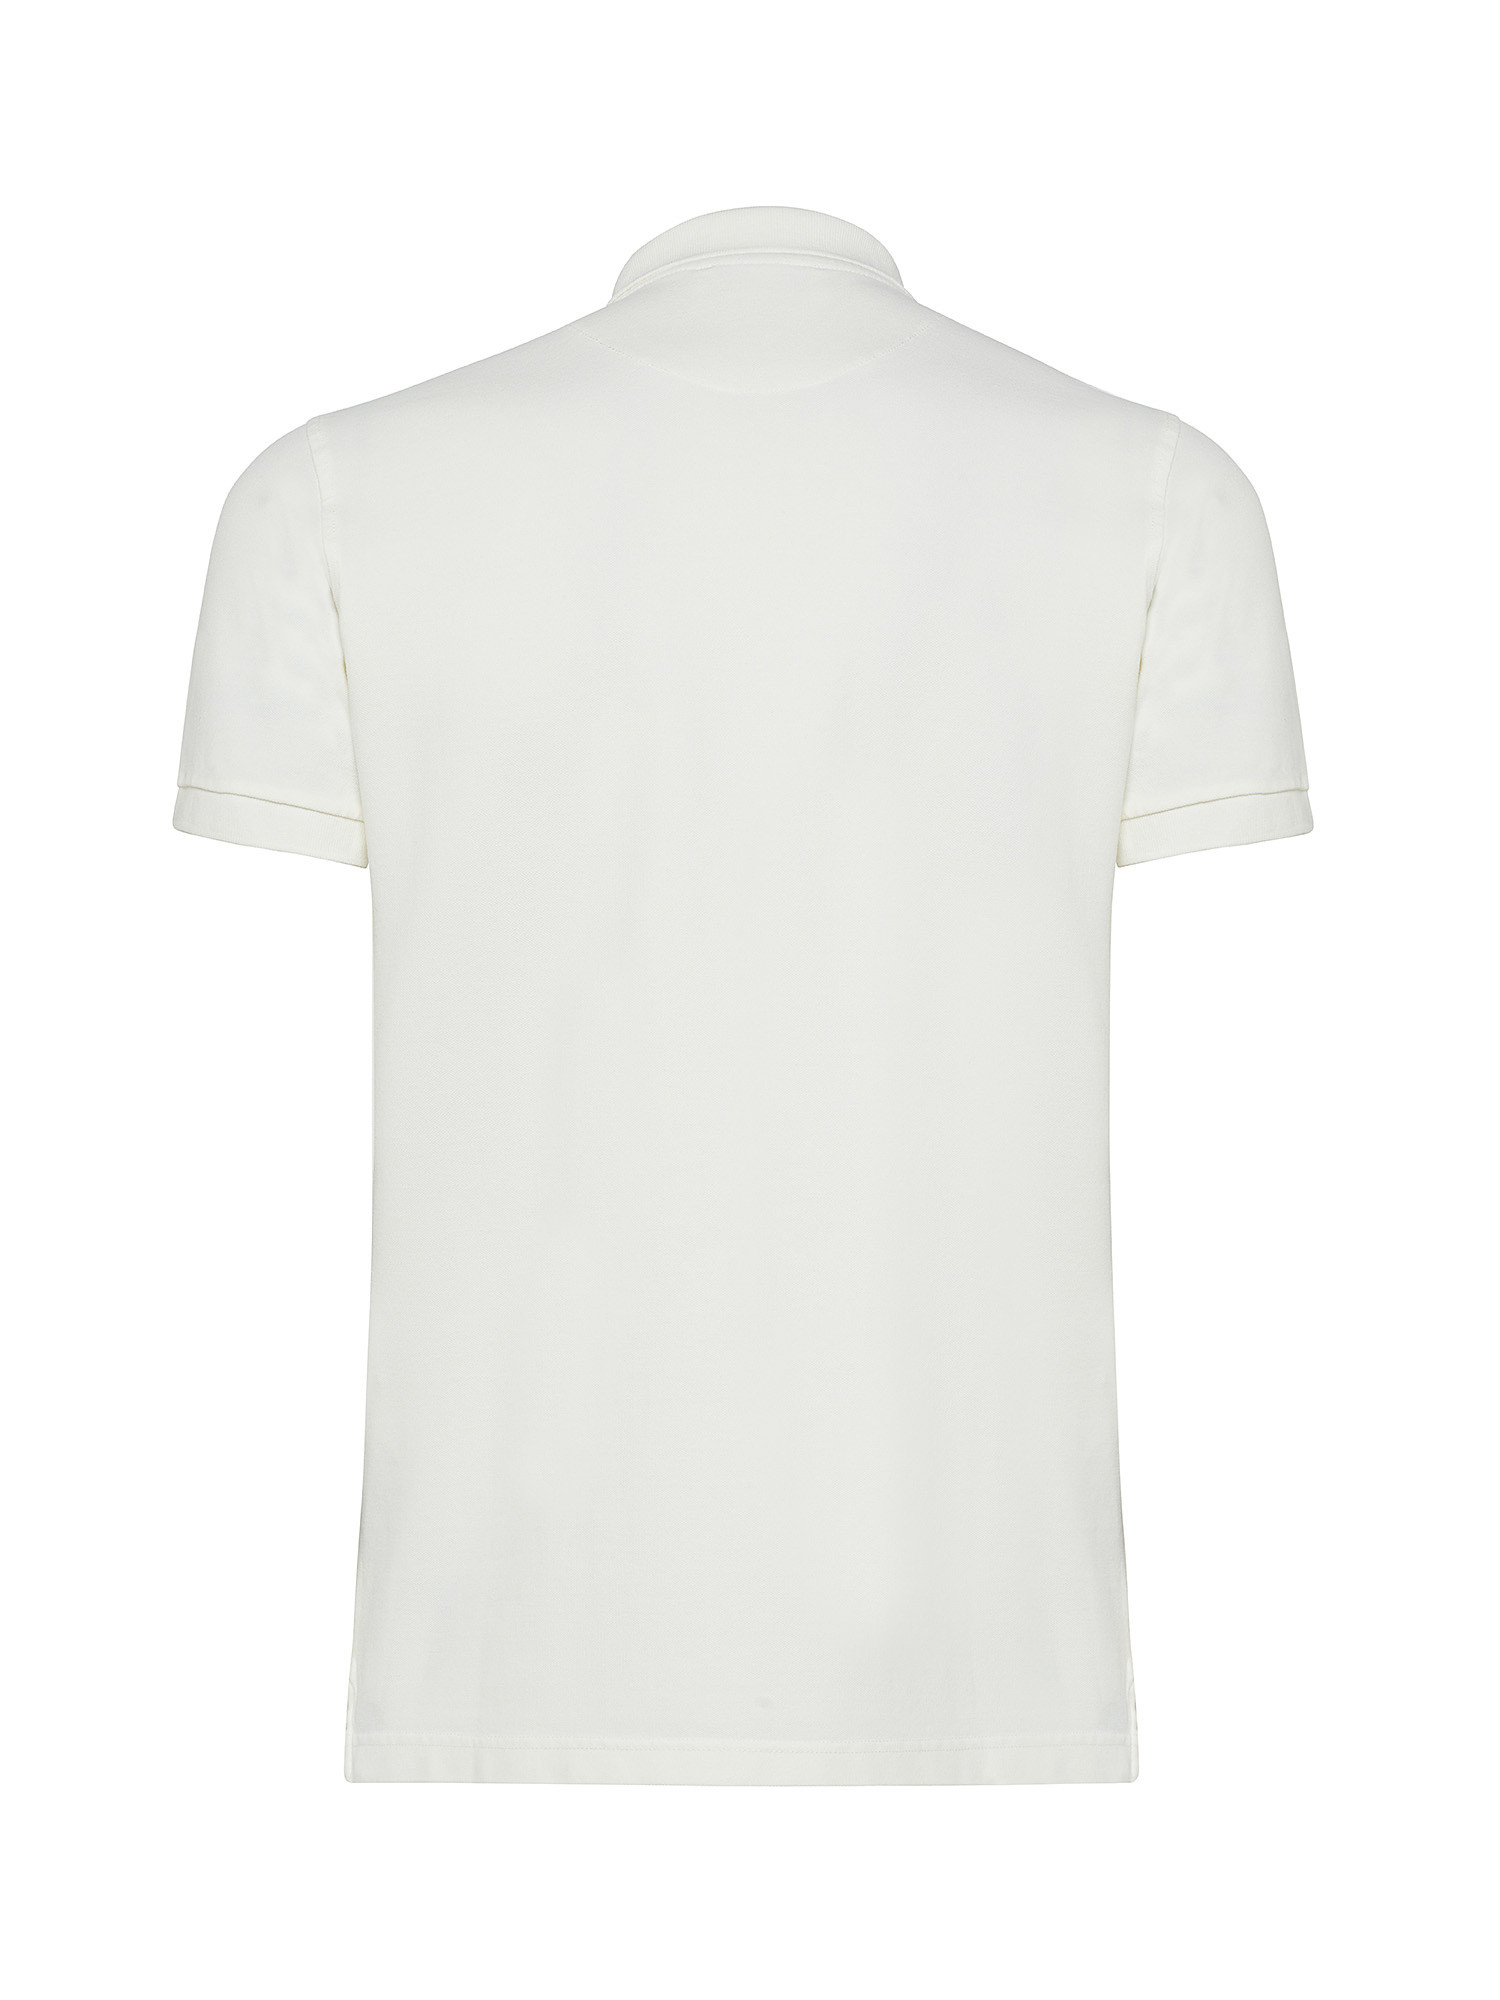 Manuel Ritz - Garment-dyed polo shirt in stretch cotton with logo, White, large image number 1